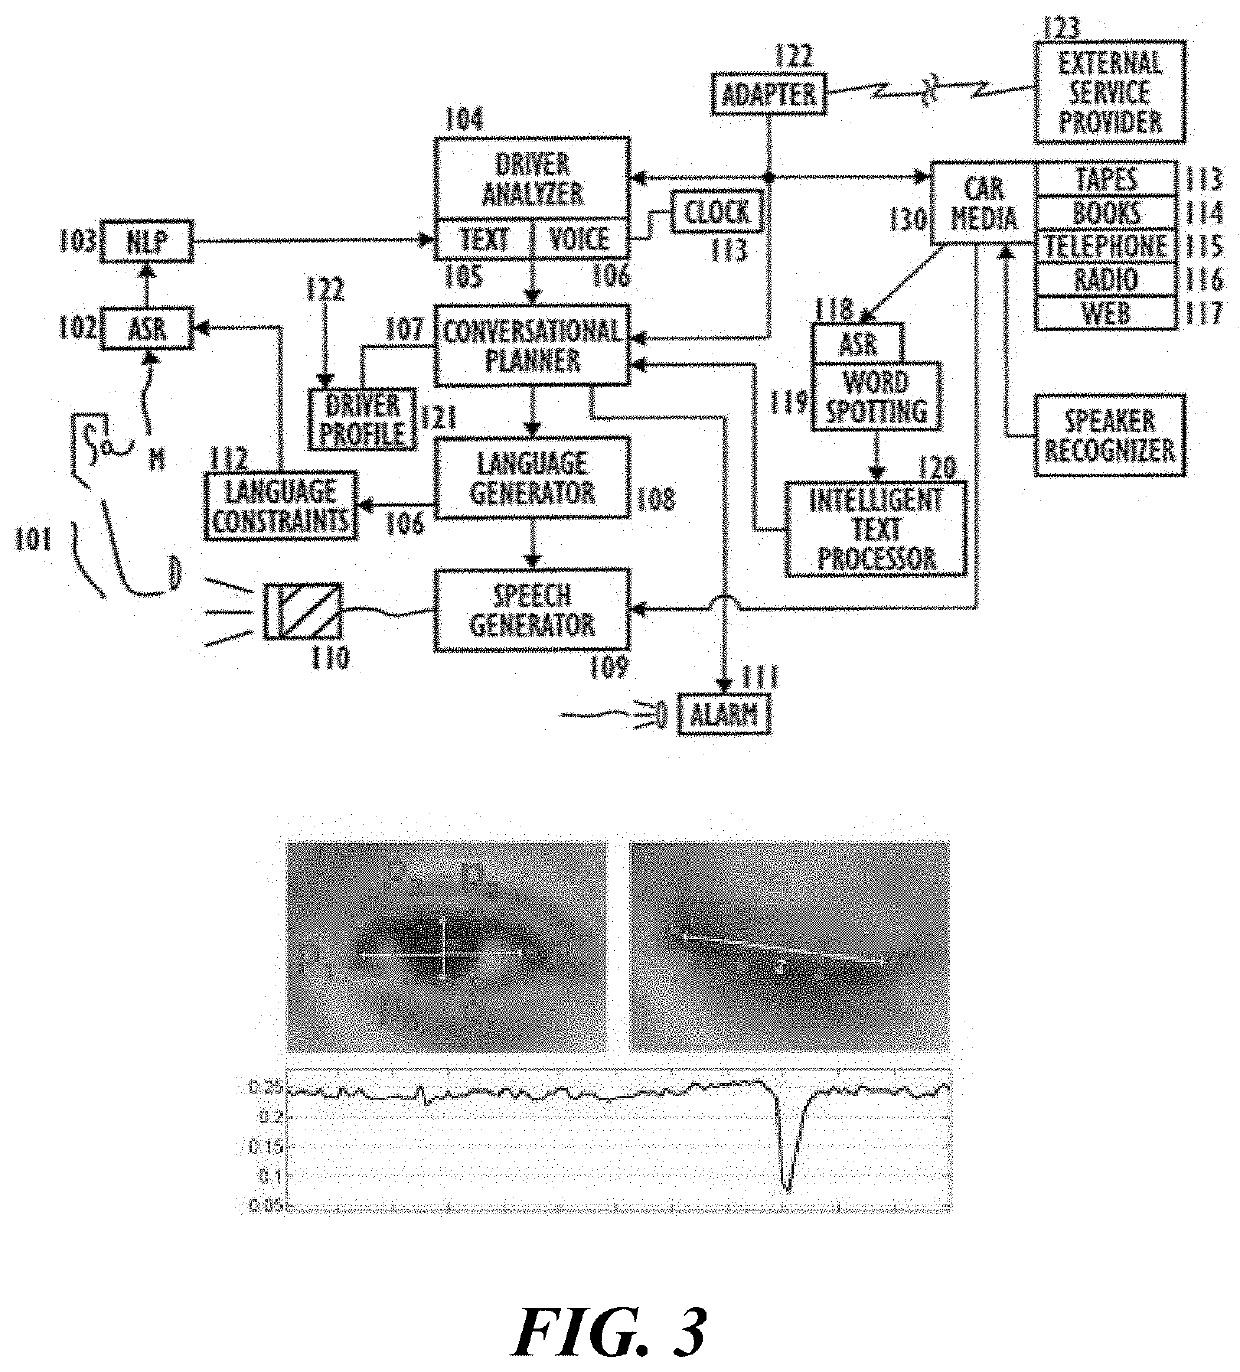 Car driver alcohol level and sleeping status detection and notification system